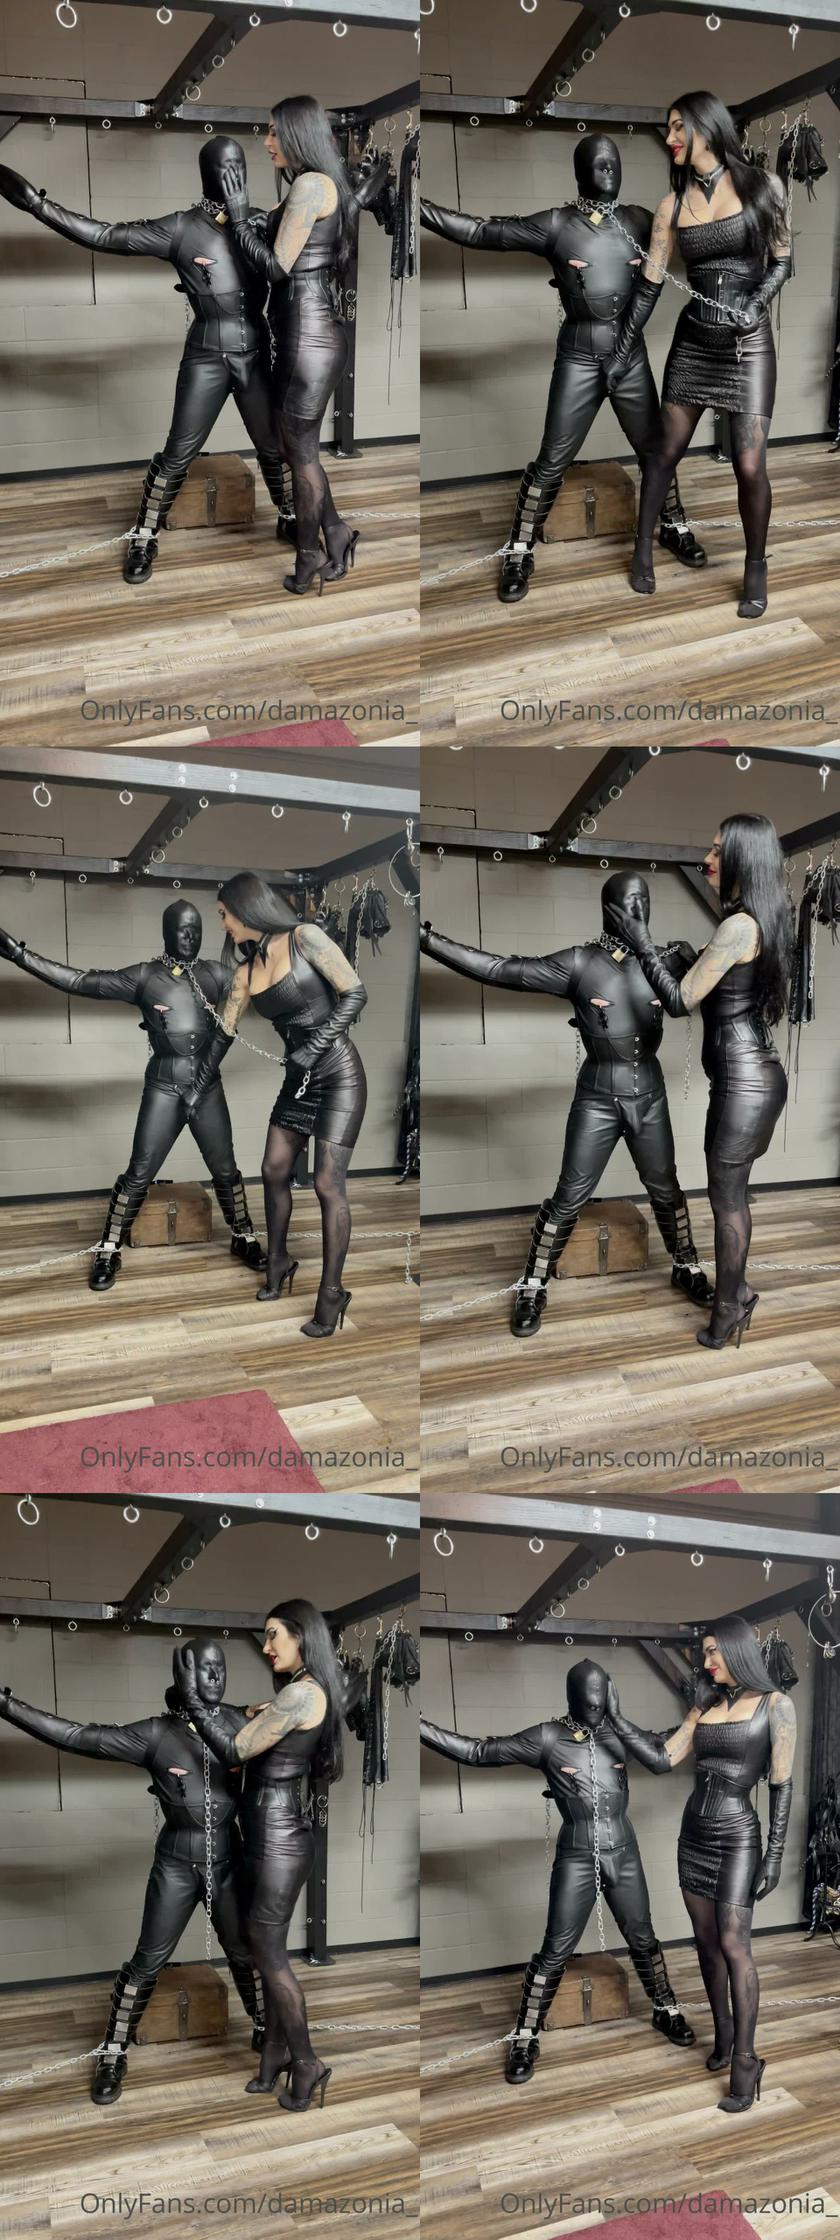 Damazonia: Teasing My Leather Gimp Seems To Bring A Smile On My Face 2022 HD Damazonia